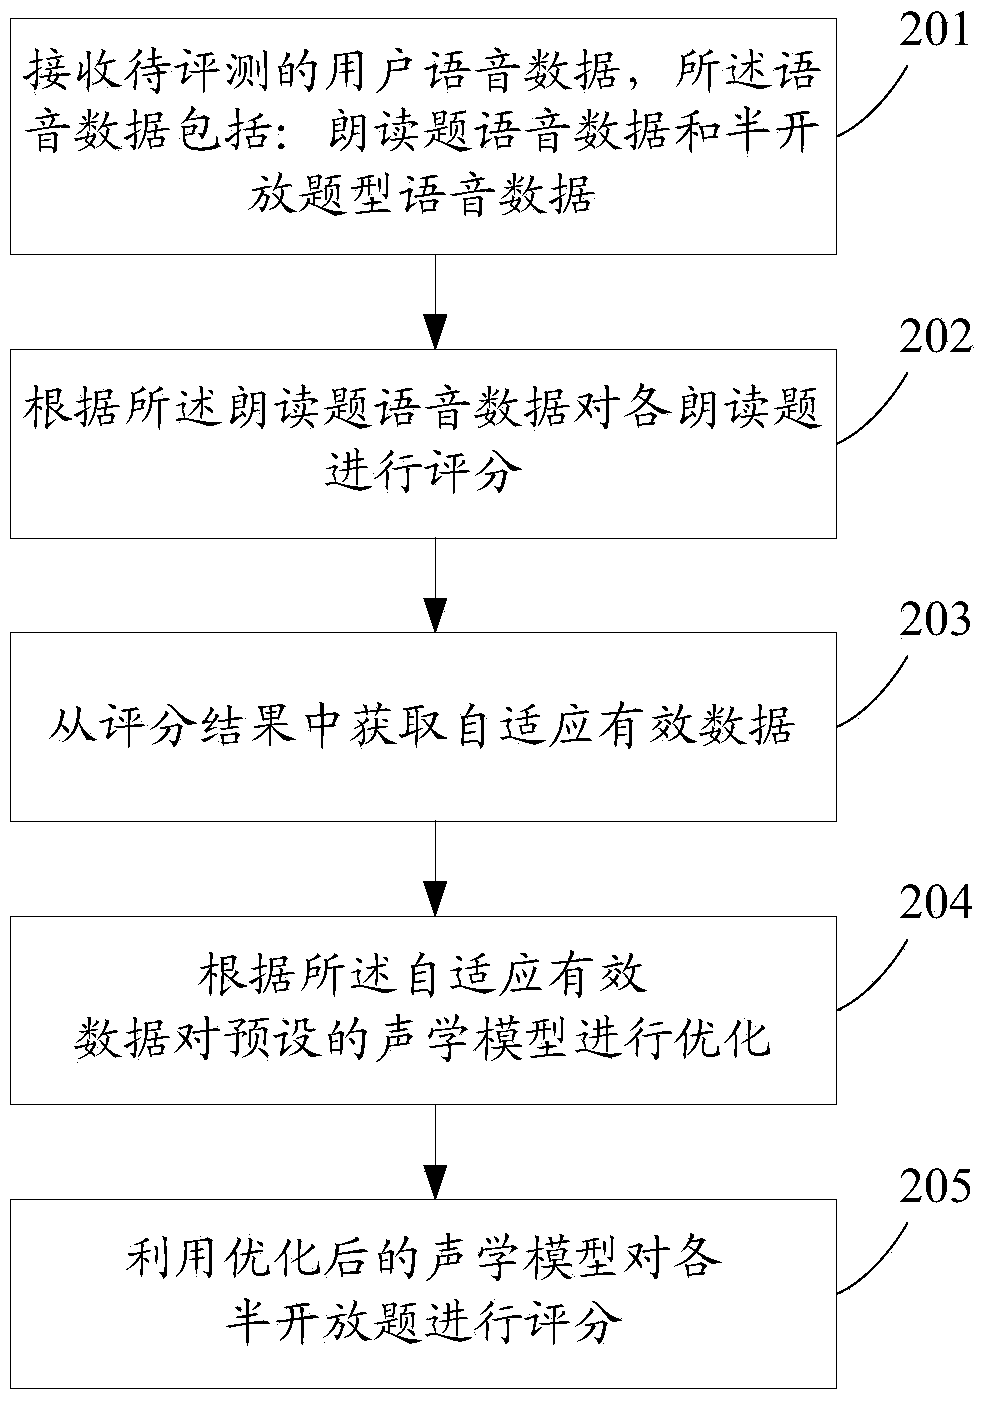 Method and system for improving oral evaluation performance